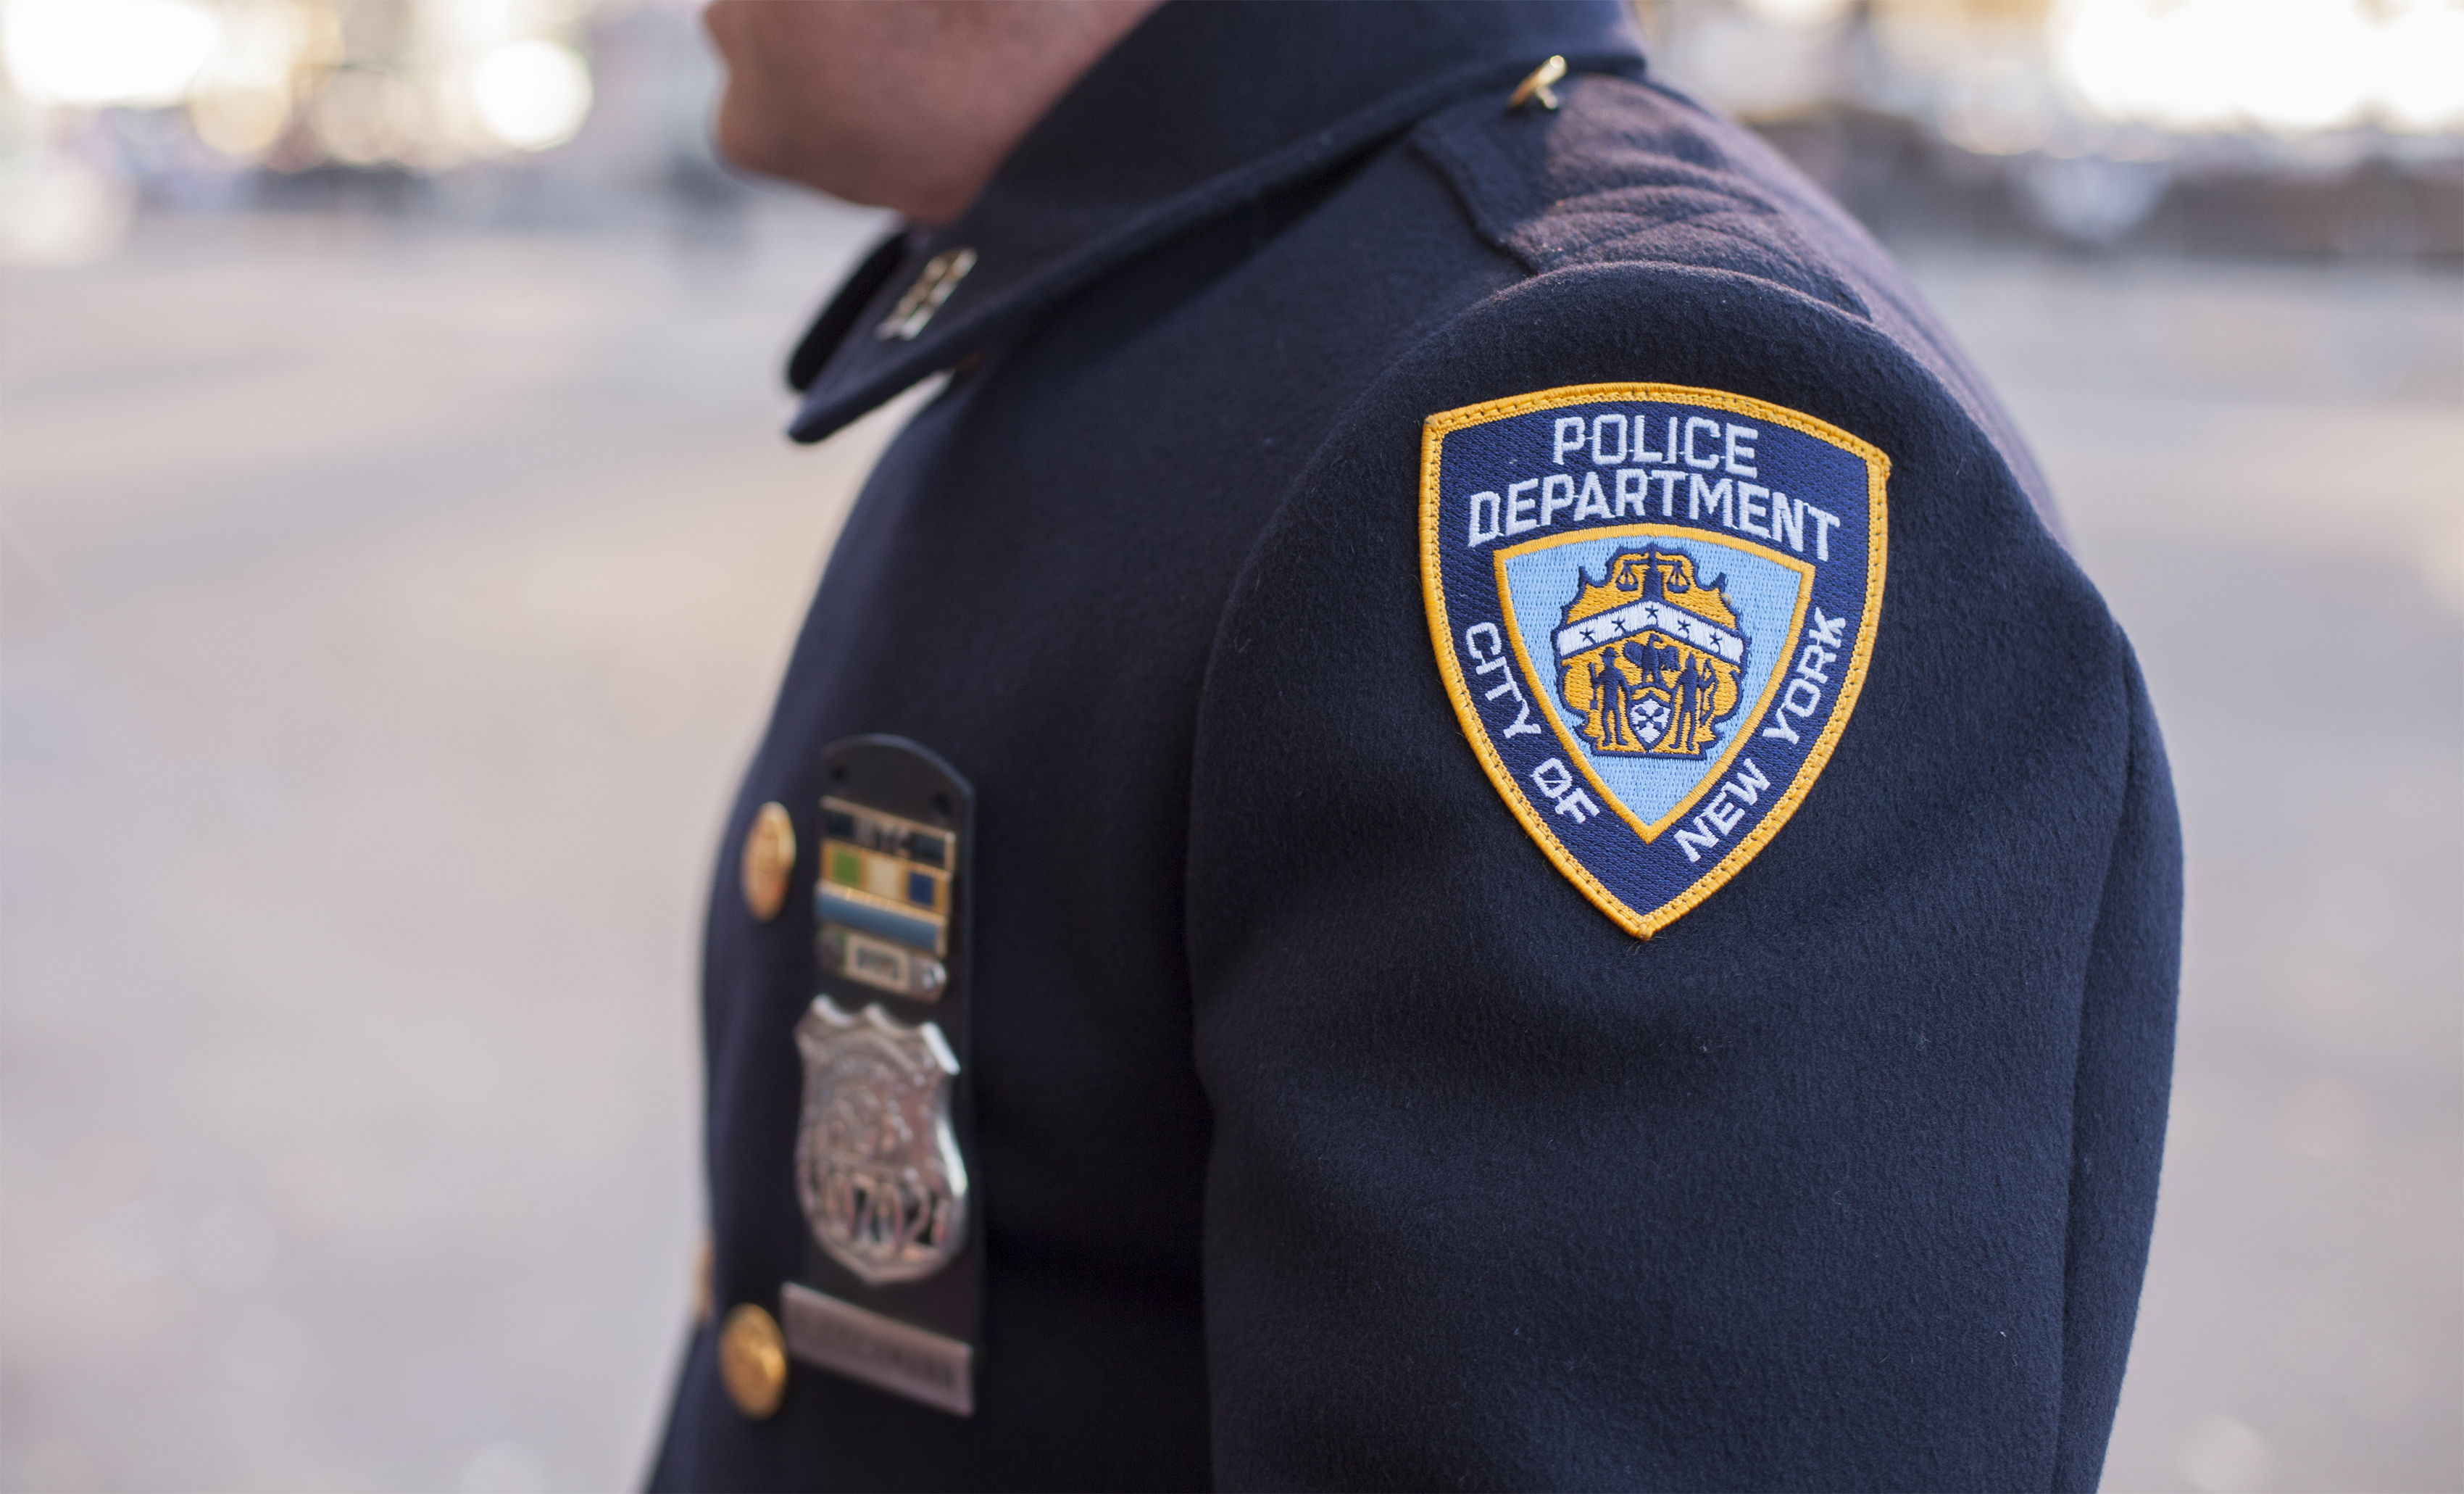 Is the NYPD ready for new role in dealing with people in
mental health crisis?